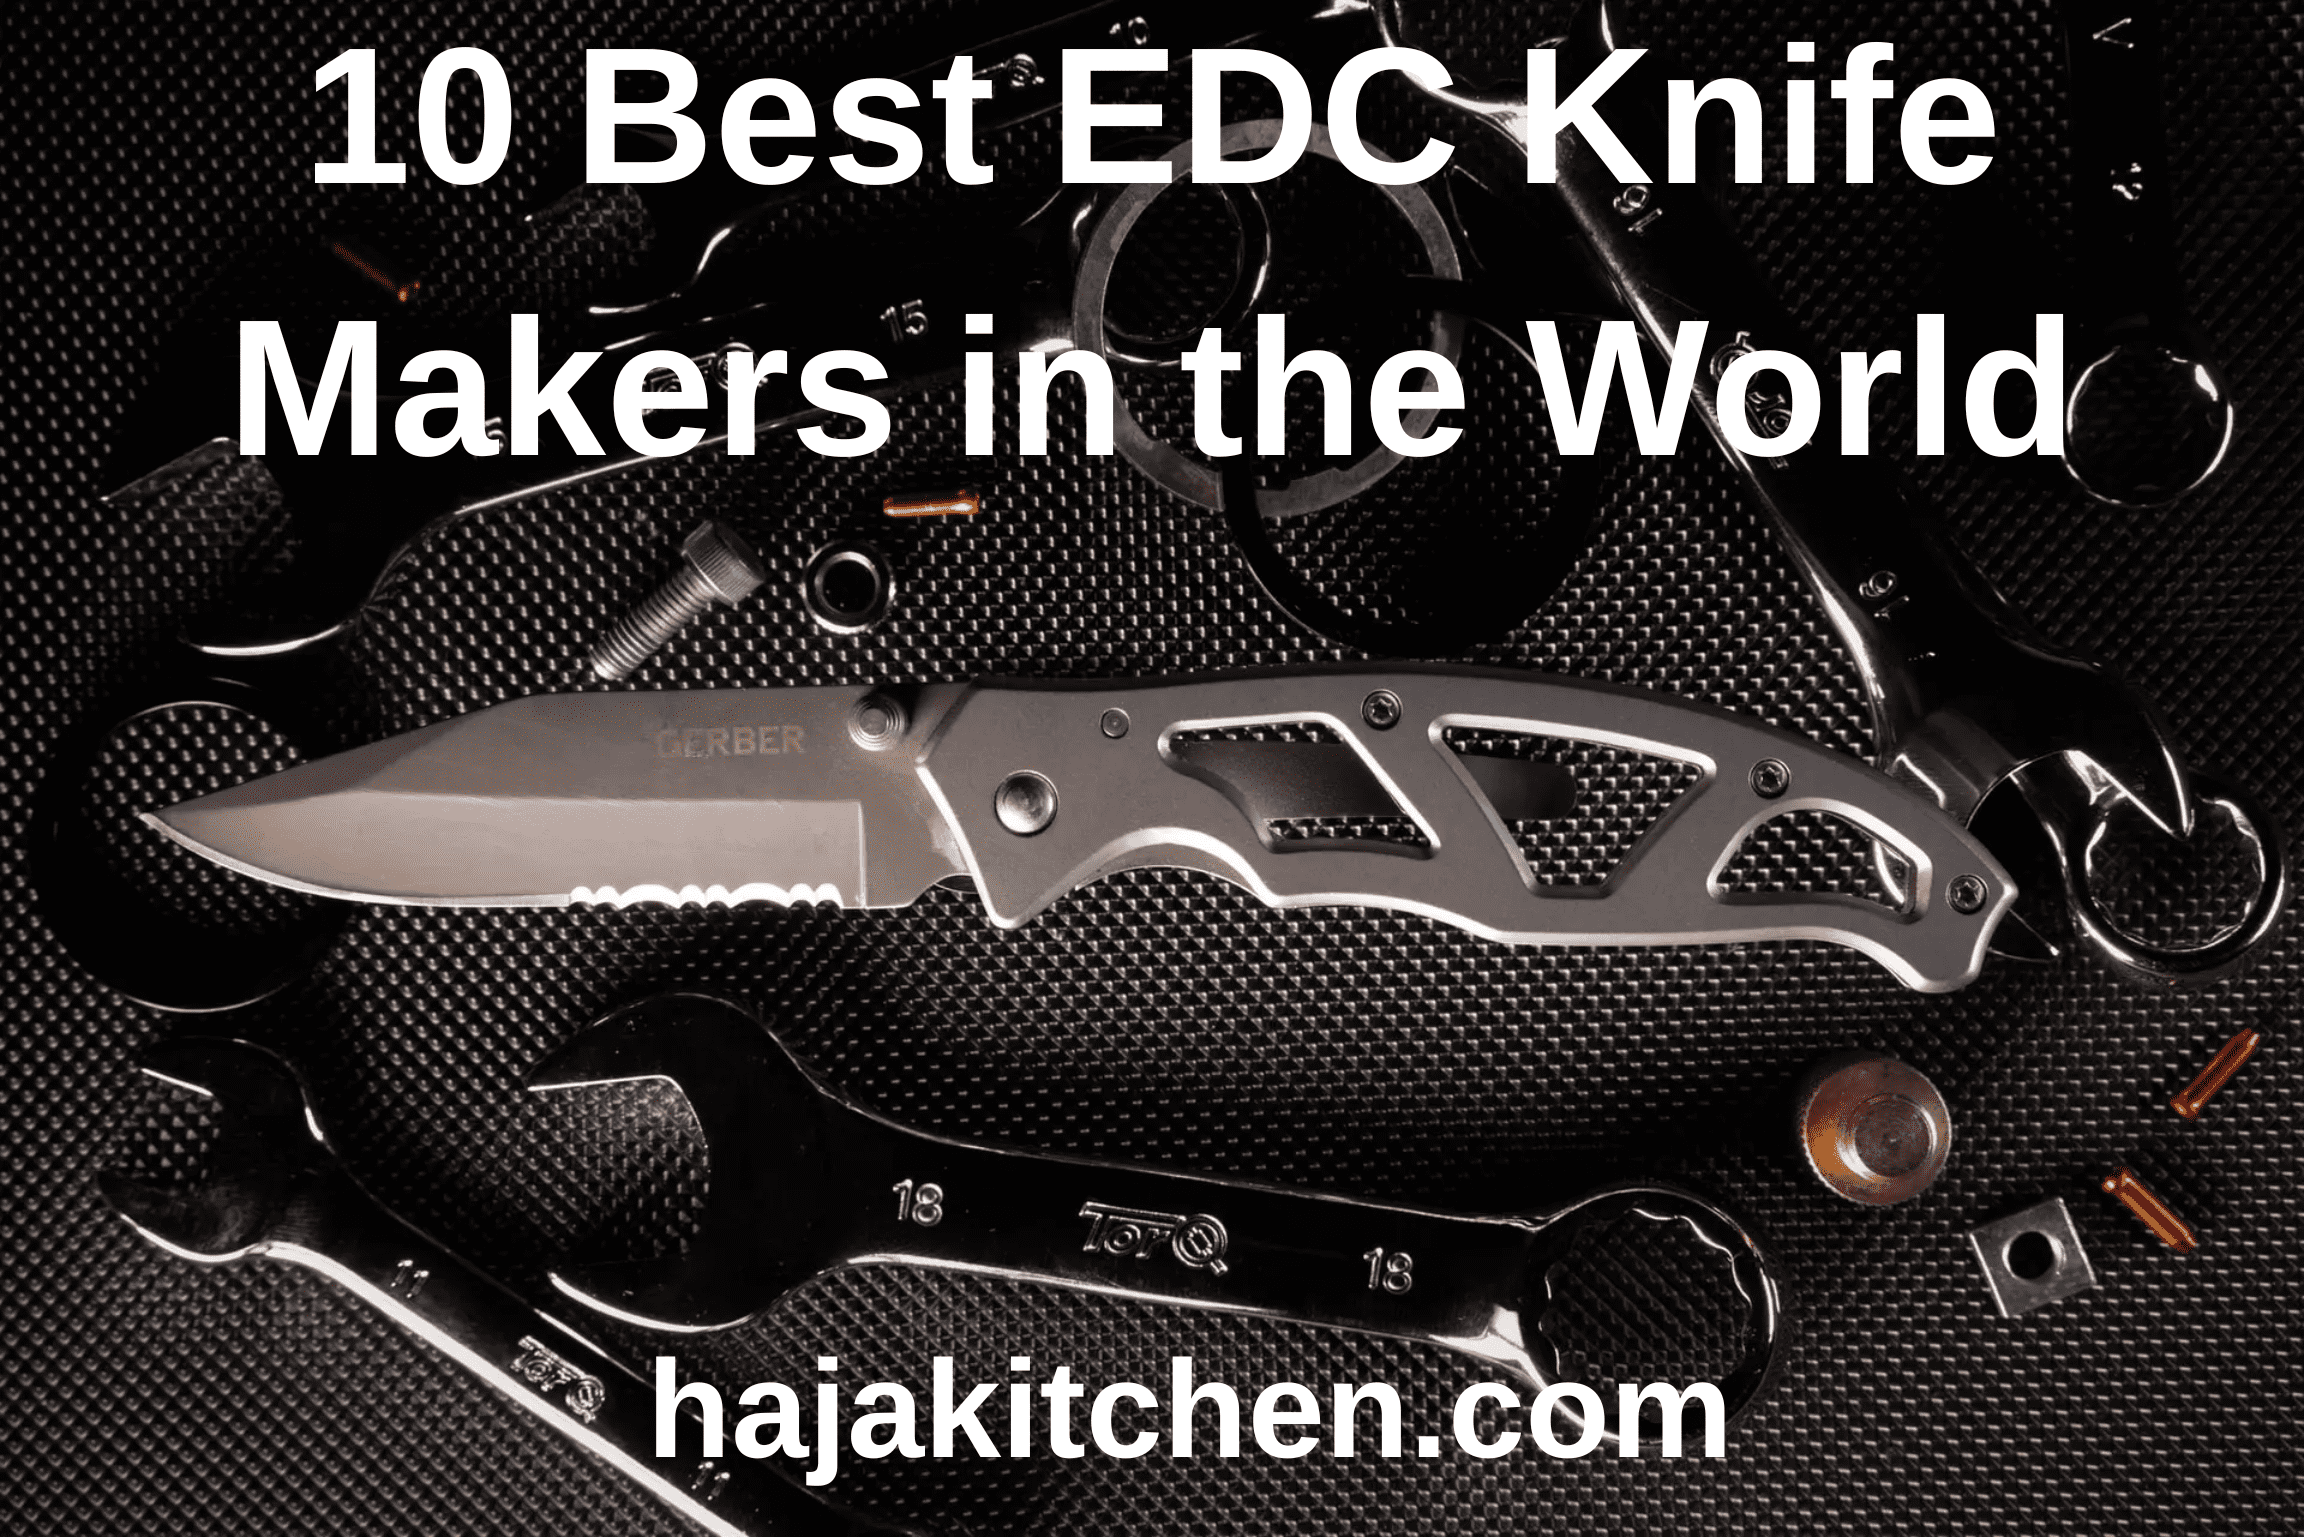 10 Best EDC Knife Makers in the World